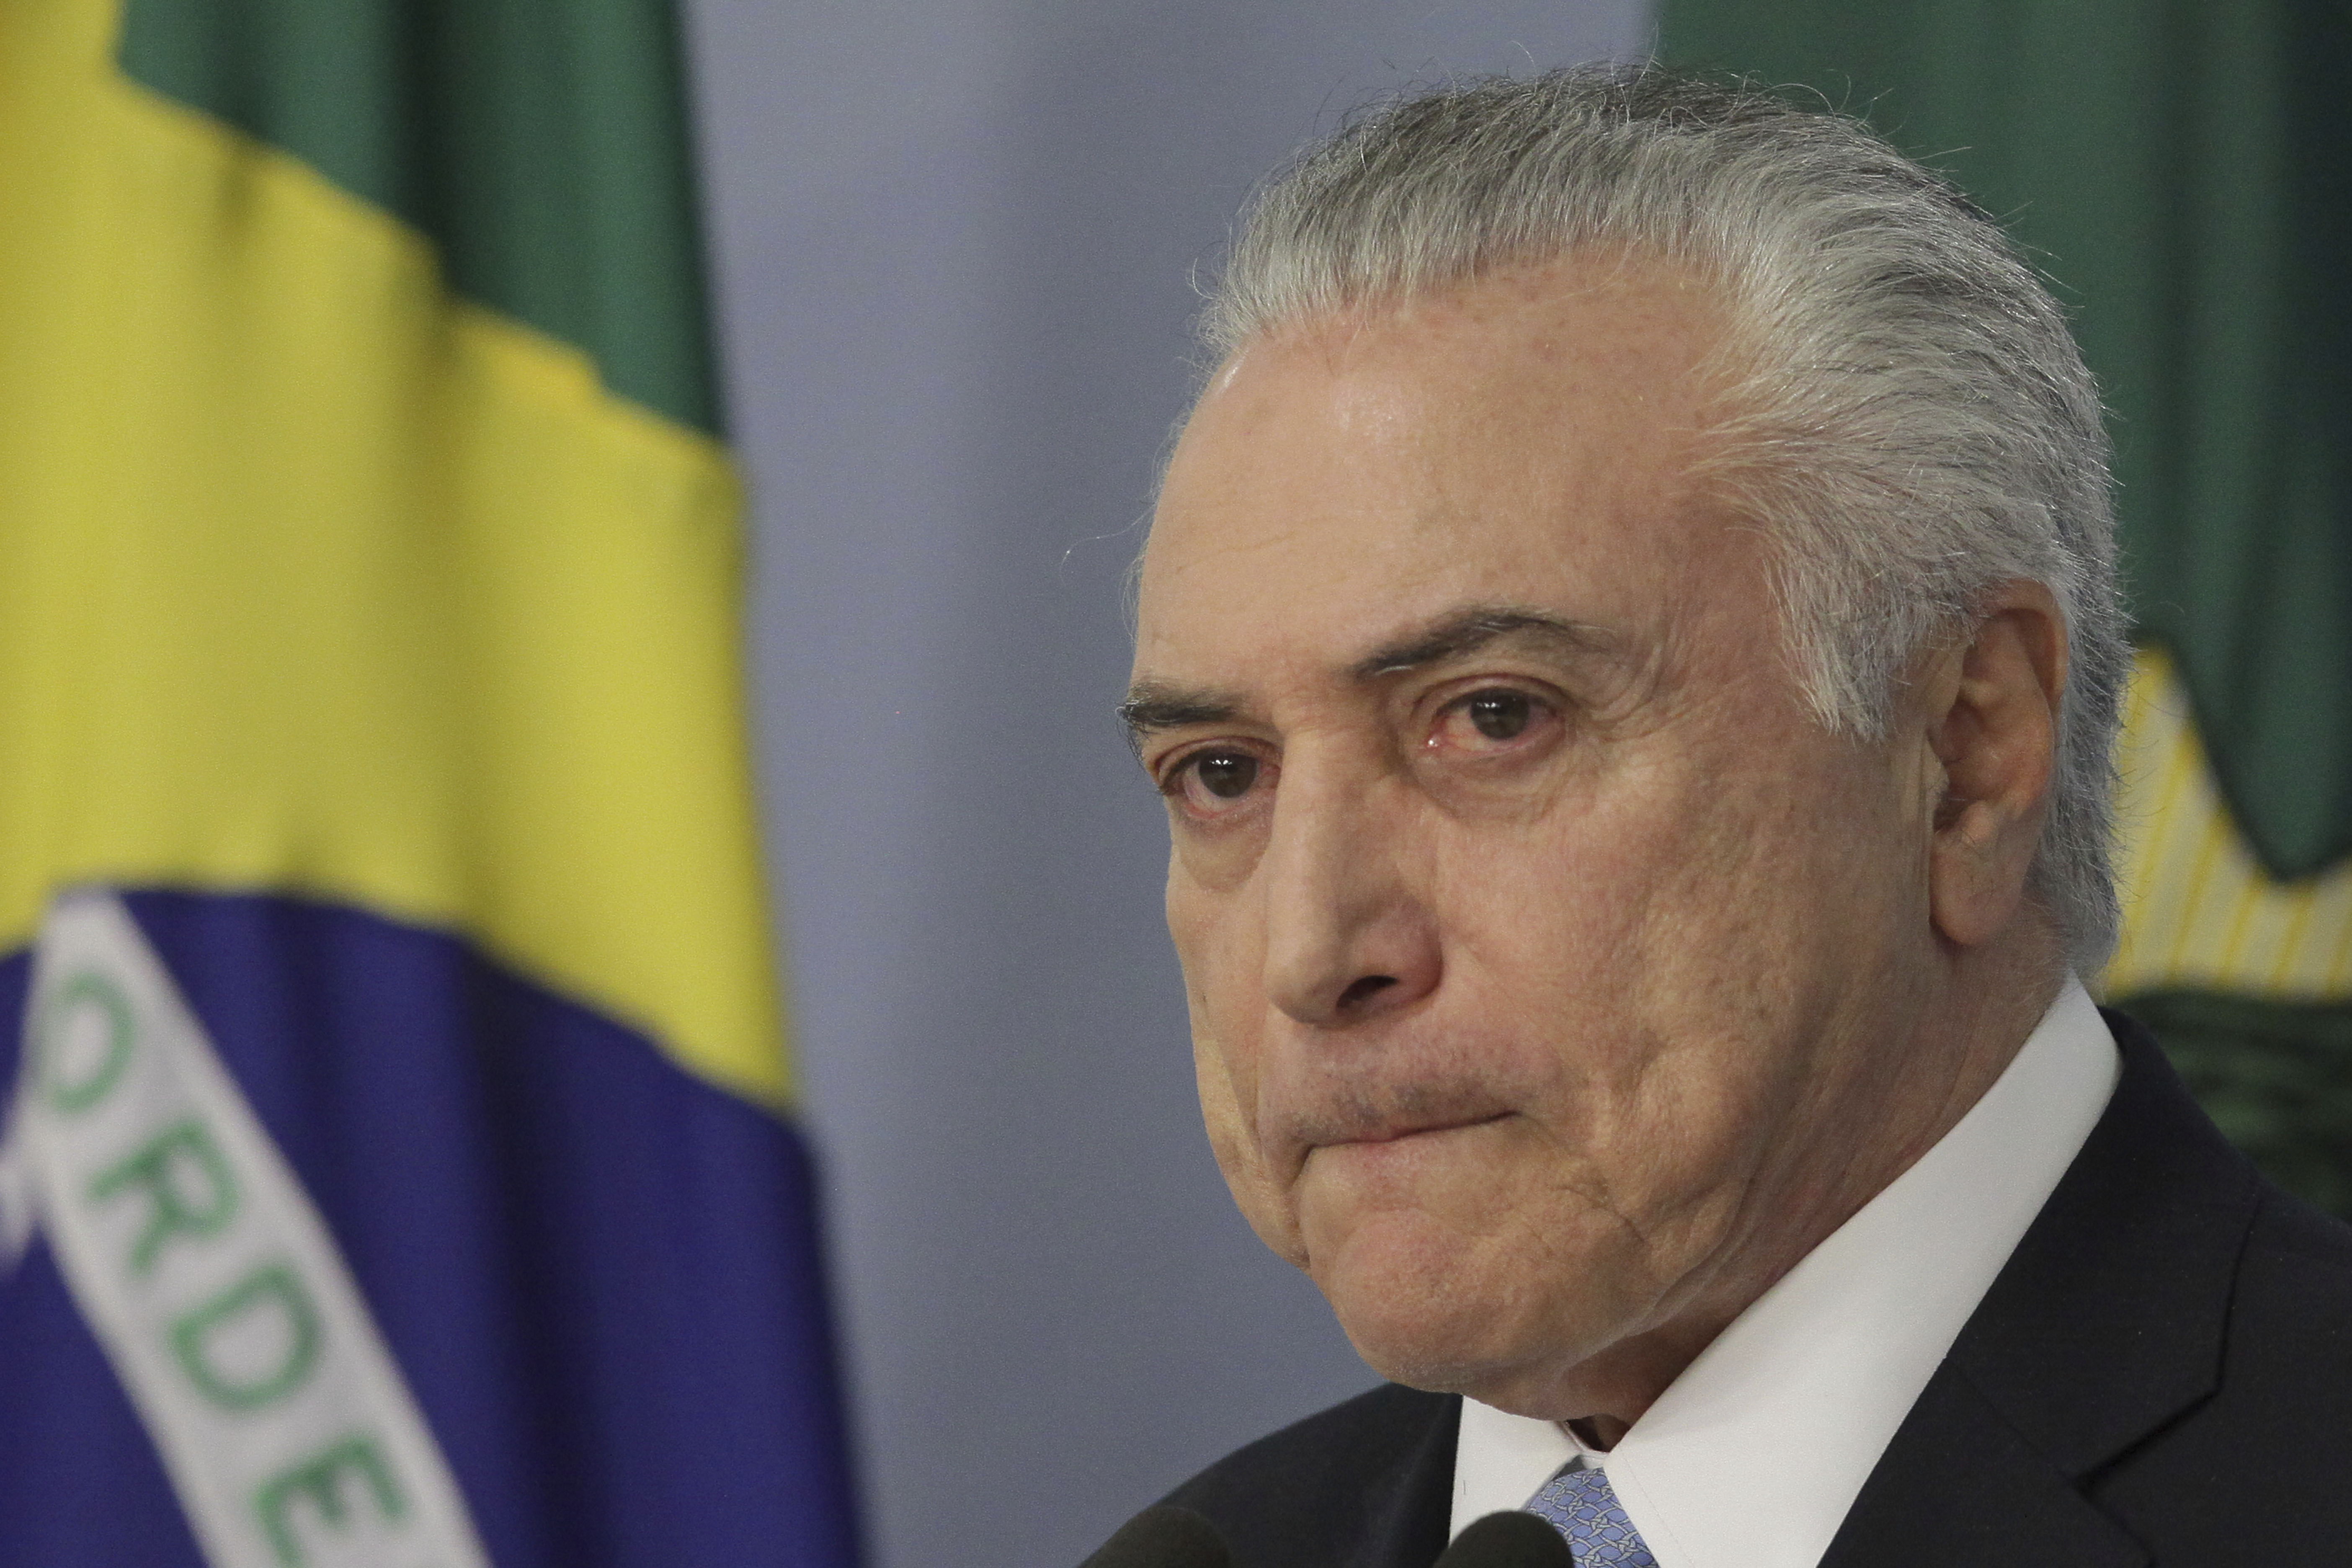 Brazil's President Michel Temer gives a statement at Planalto presidential palace in Brasilia, Brazil, Wednesday, Aug. 2, 2017, after surviving a key congressional vote that could have suspended him over a bribery charge. The bribery allegation, which stunned even Brazilians inured to graft cases, was the latest in a bevy of scandals that has rocked the administration and created deep uncertainty and angst in Latin America’s largest nation. (AP Photo/Eraldo Peres)